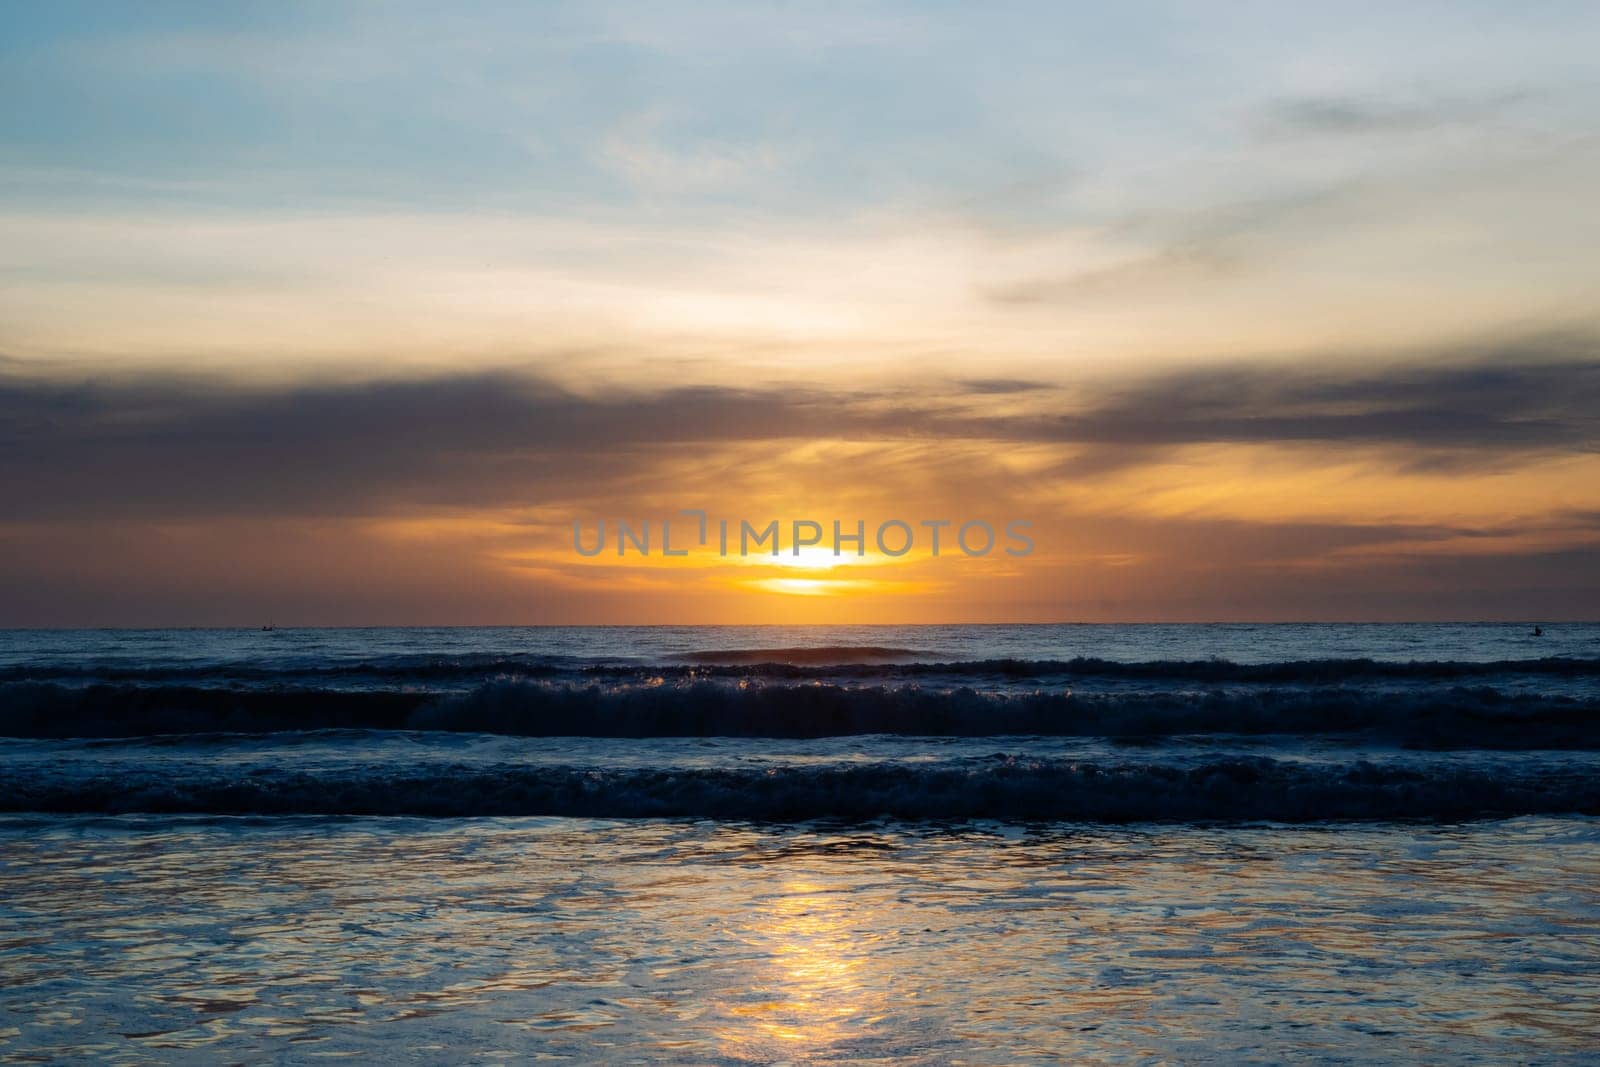 Affirmation photo You are free to be different Love yourself sunset over the sea horizon orange sky clouds dark sea water edge sand.